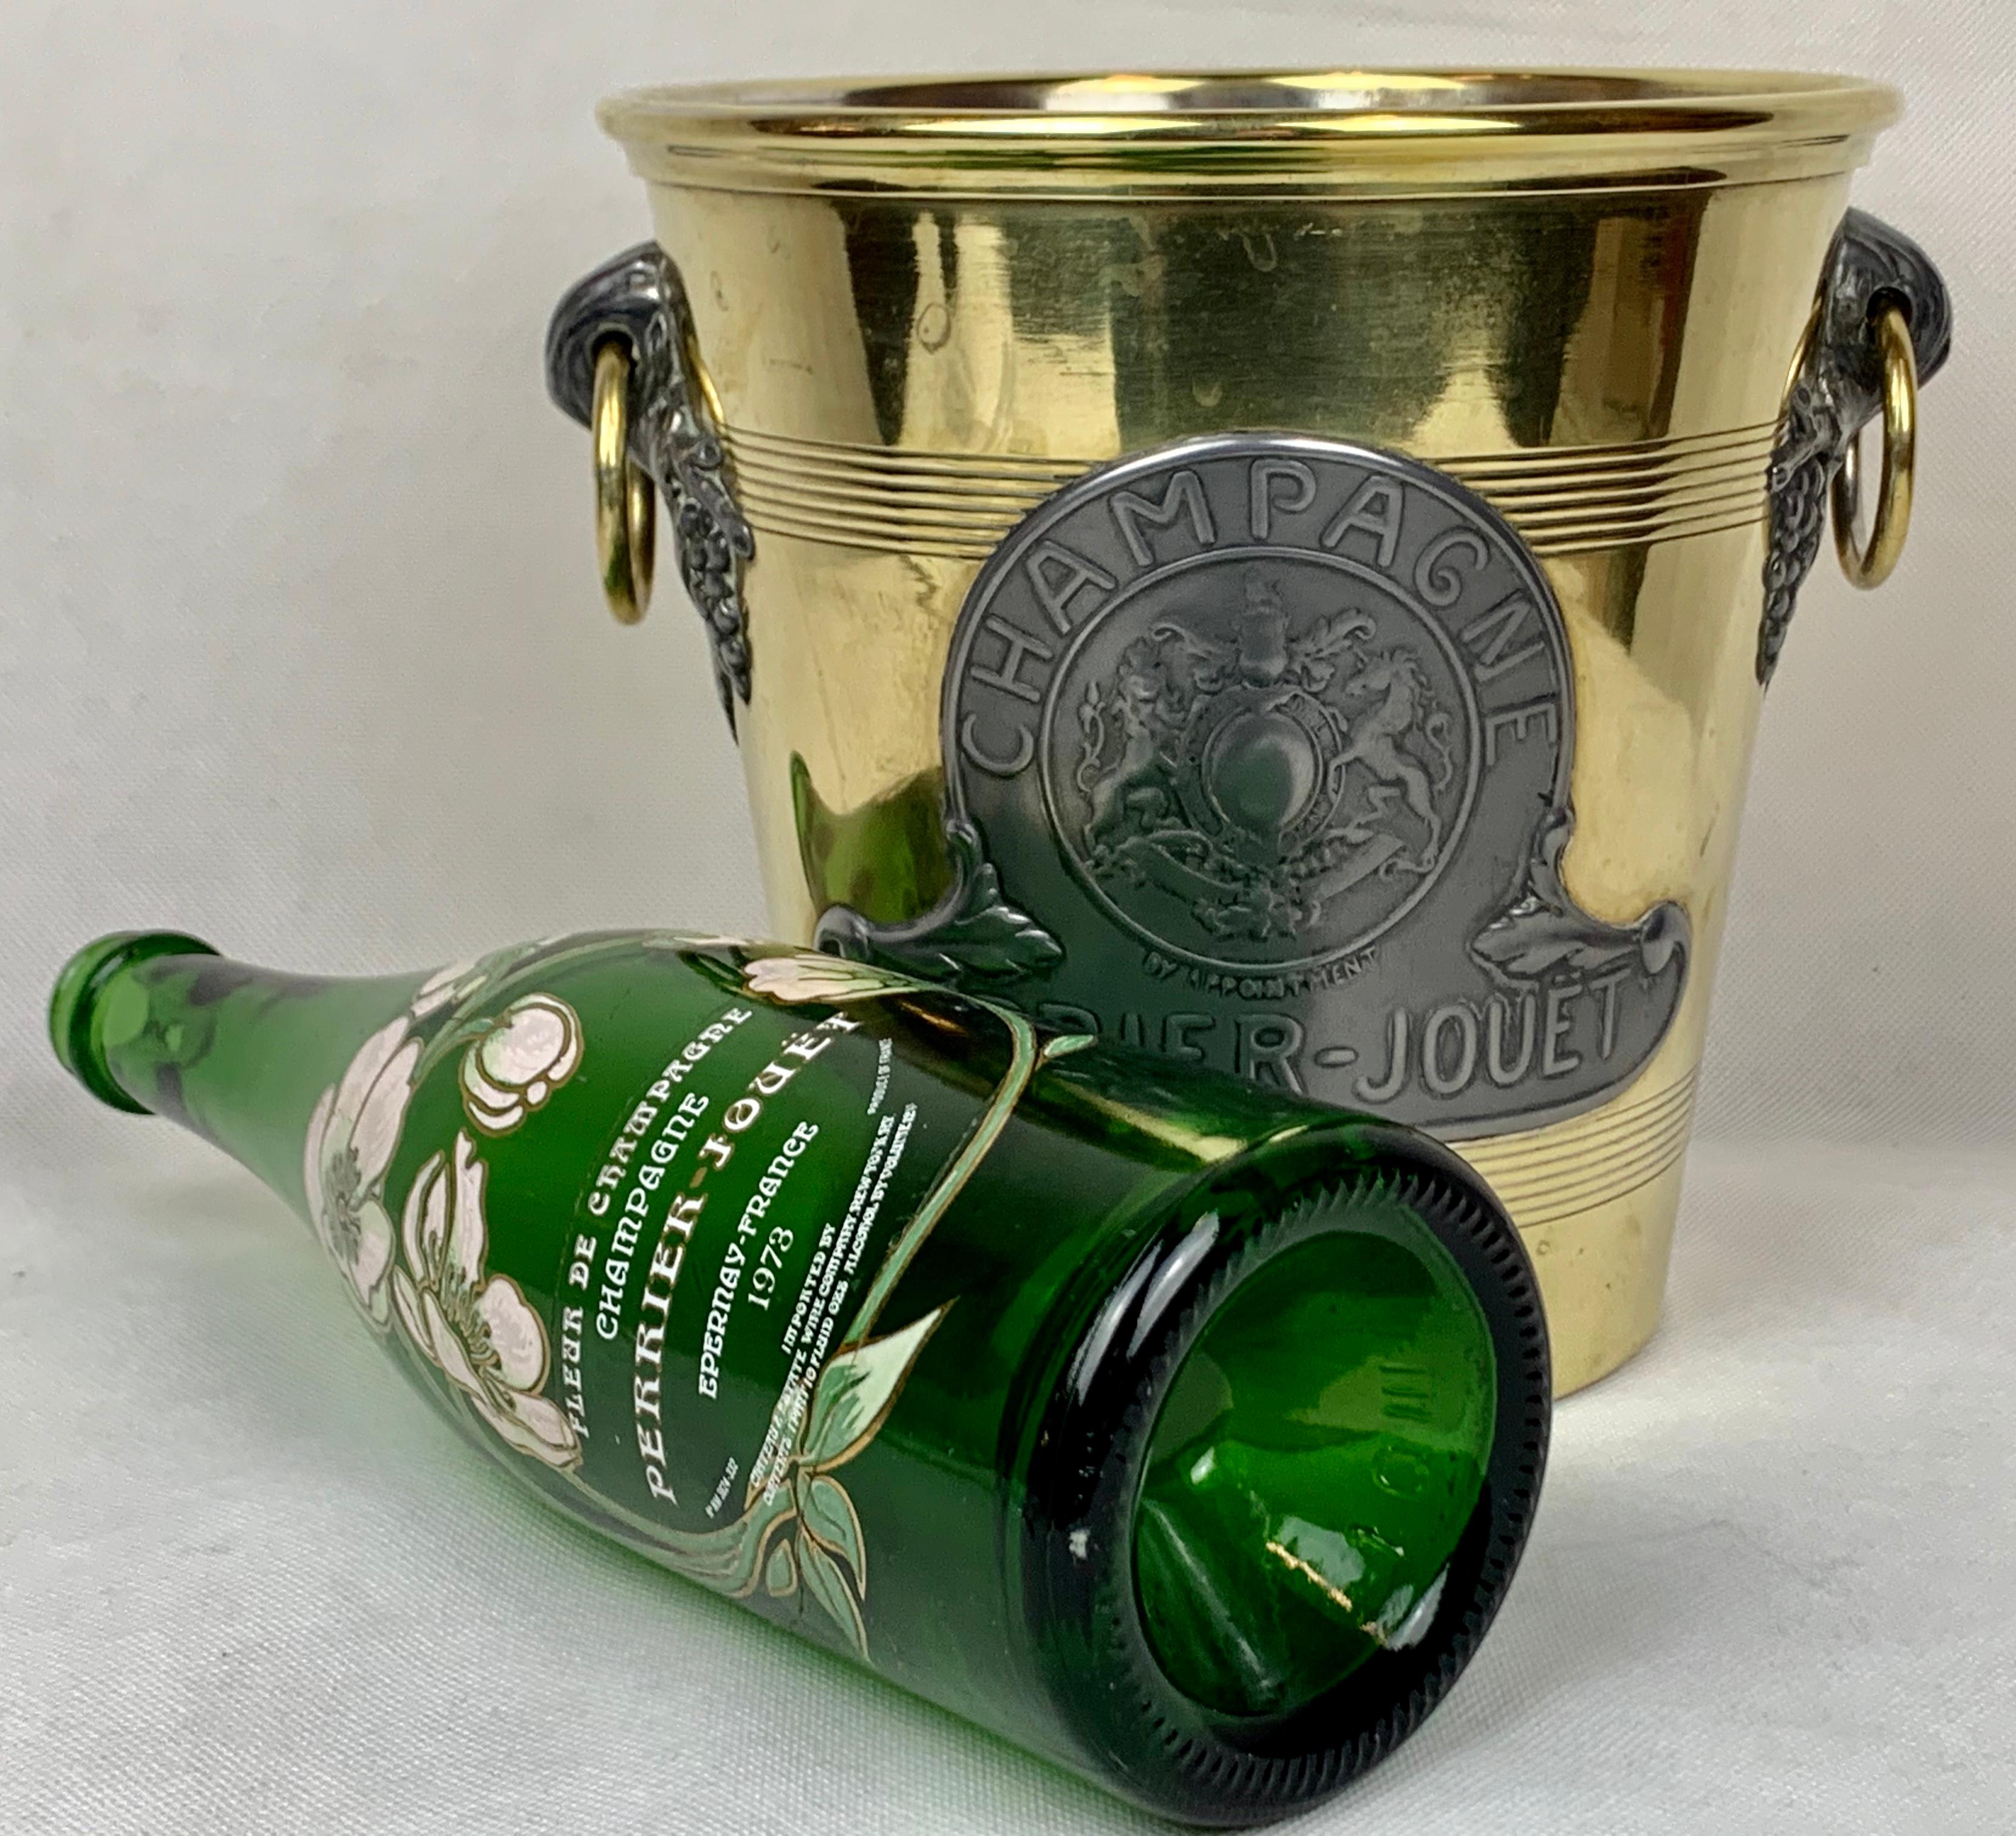  Antique Perrier-Jouet Champagne Cooler in Brass and Pewter Made by Argit, Paris 4